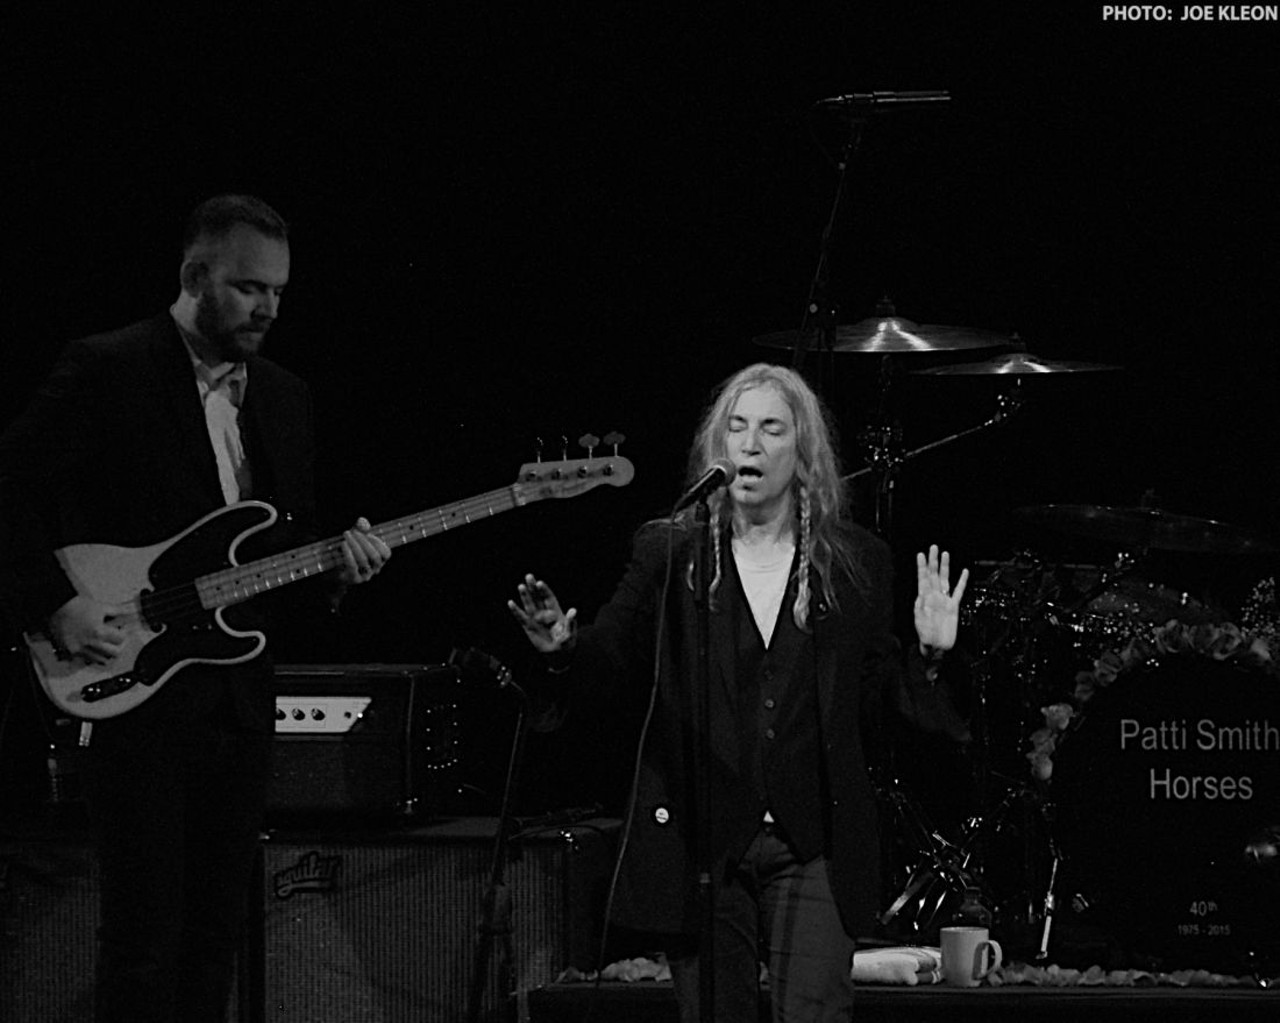 Patti Smith and Her Band Performing at the State Theatre